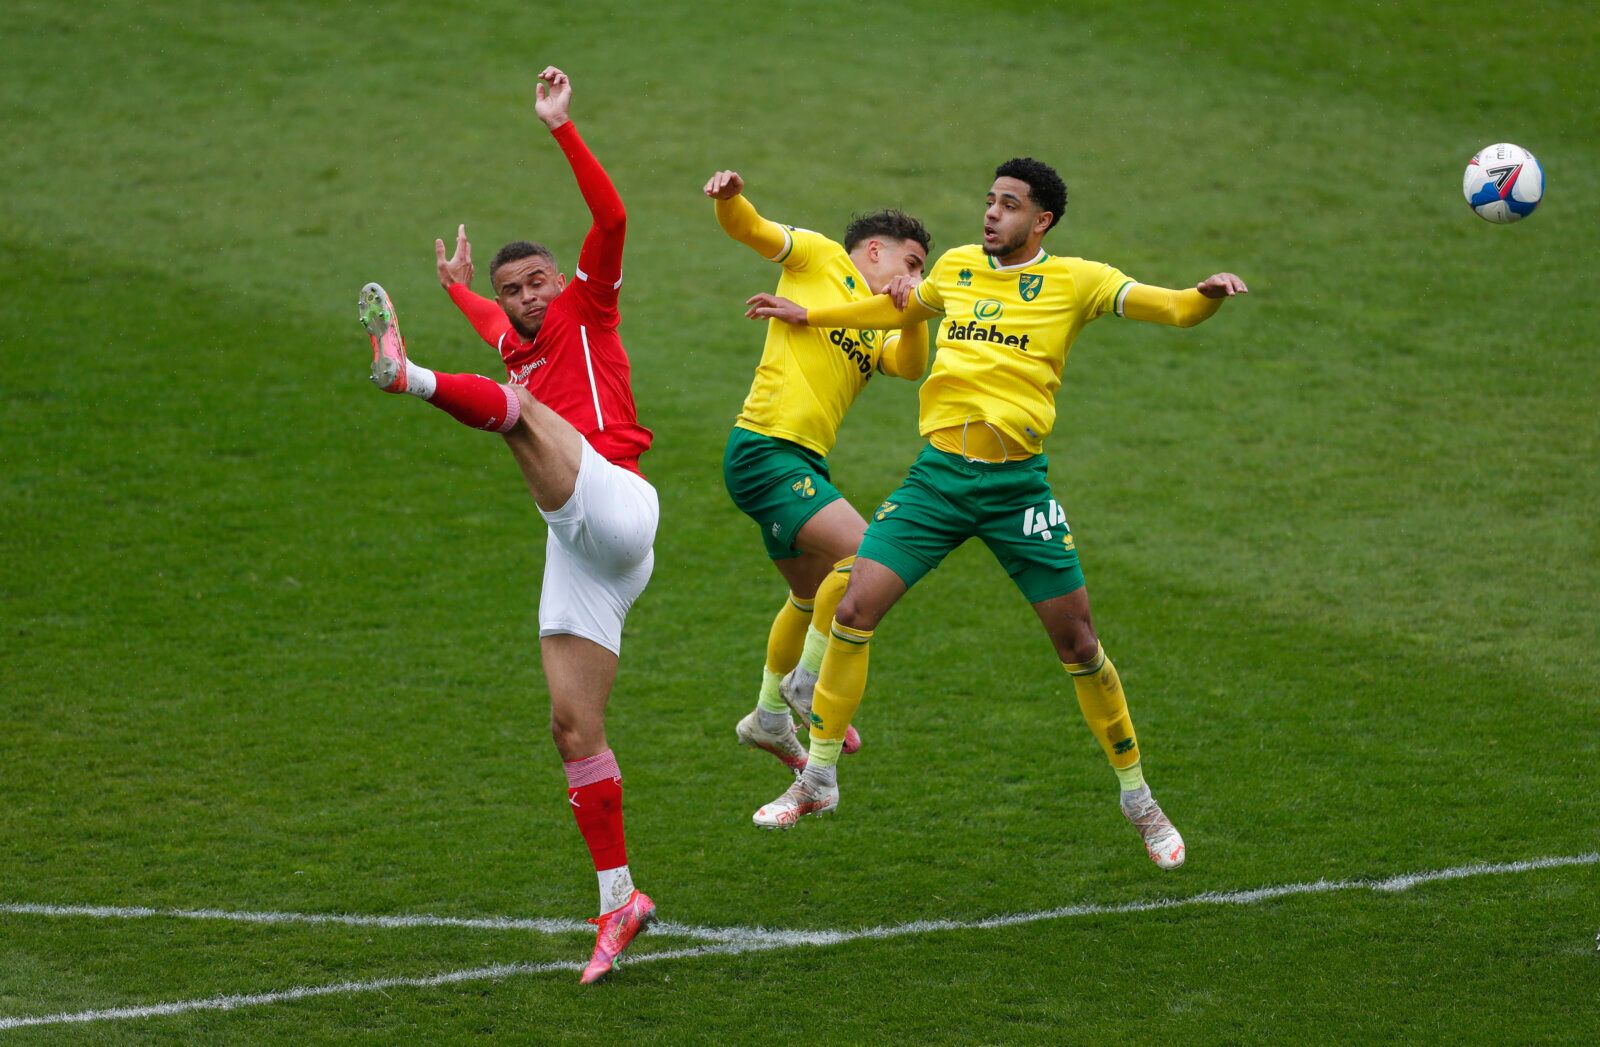 Soccer Football - Championship - Barnsley v Norwich City - Oakwell, Barnsley, Britain - May 8, 2021 Norwich City's Andrew Omobamidele in action with Barnsley's Carlton Morris Action Images via Reuters/Lee Smith EDITORIAL USE ONLY. No use with unauthorized audio, video, data, fixture lists, club/league logos or 'live' services. Online in-match use limited to 75 images, no video emulation. No use in betting, games or single club /league/player publications.  Please contact your account representat